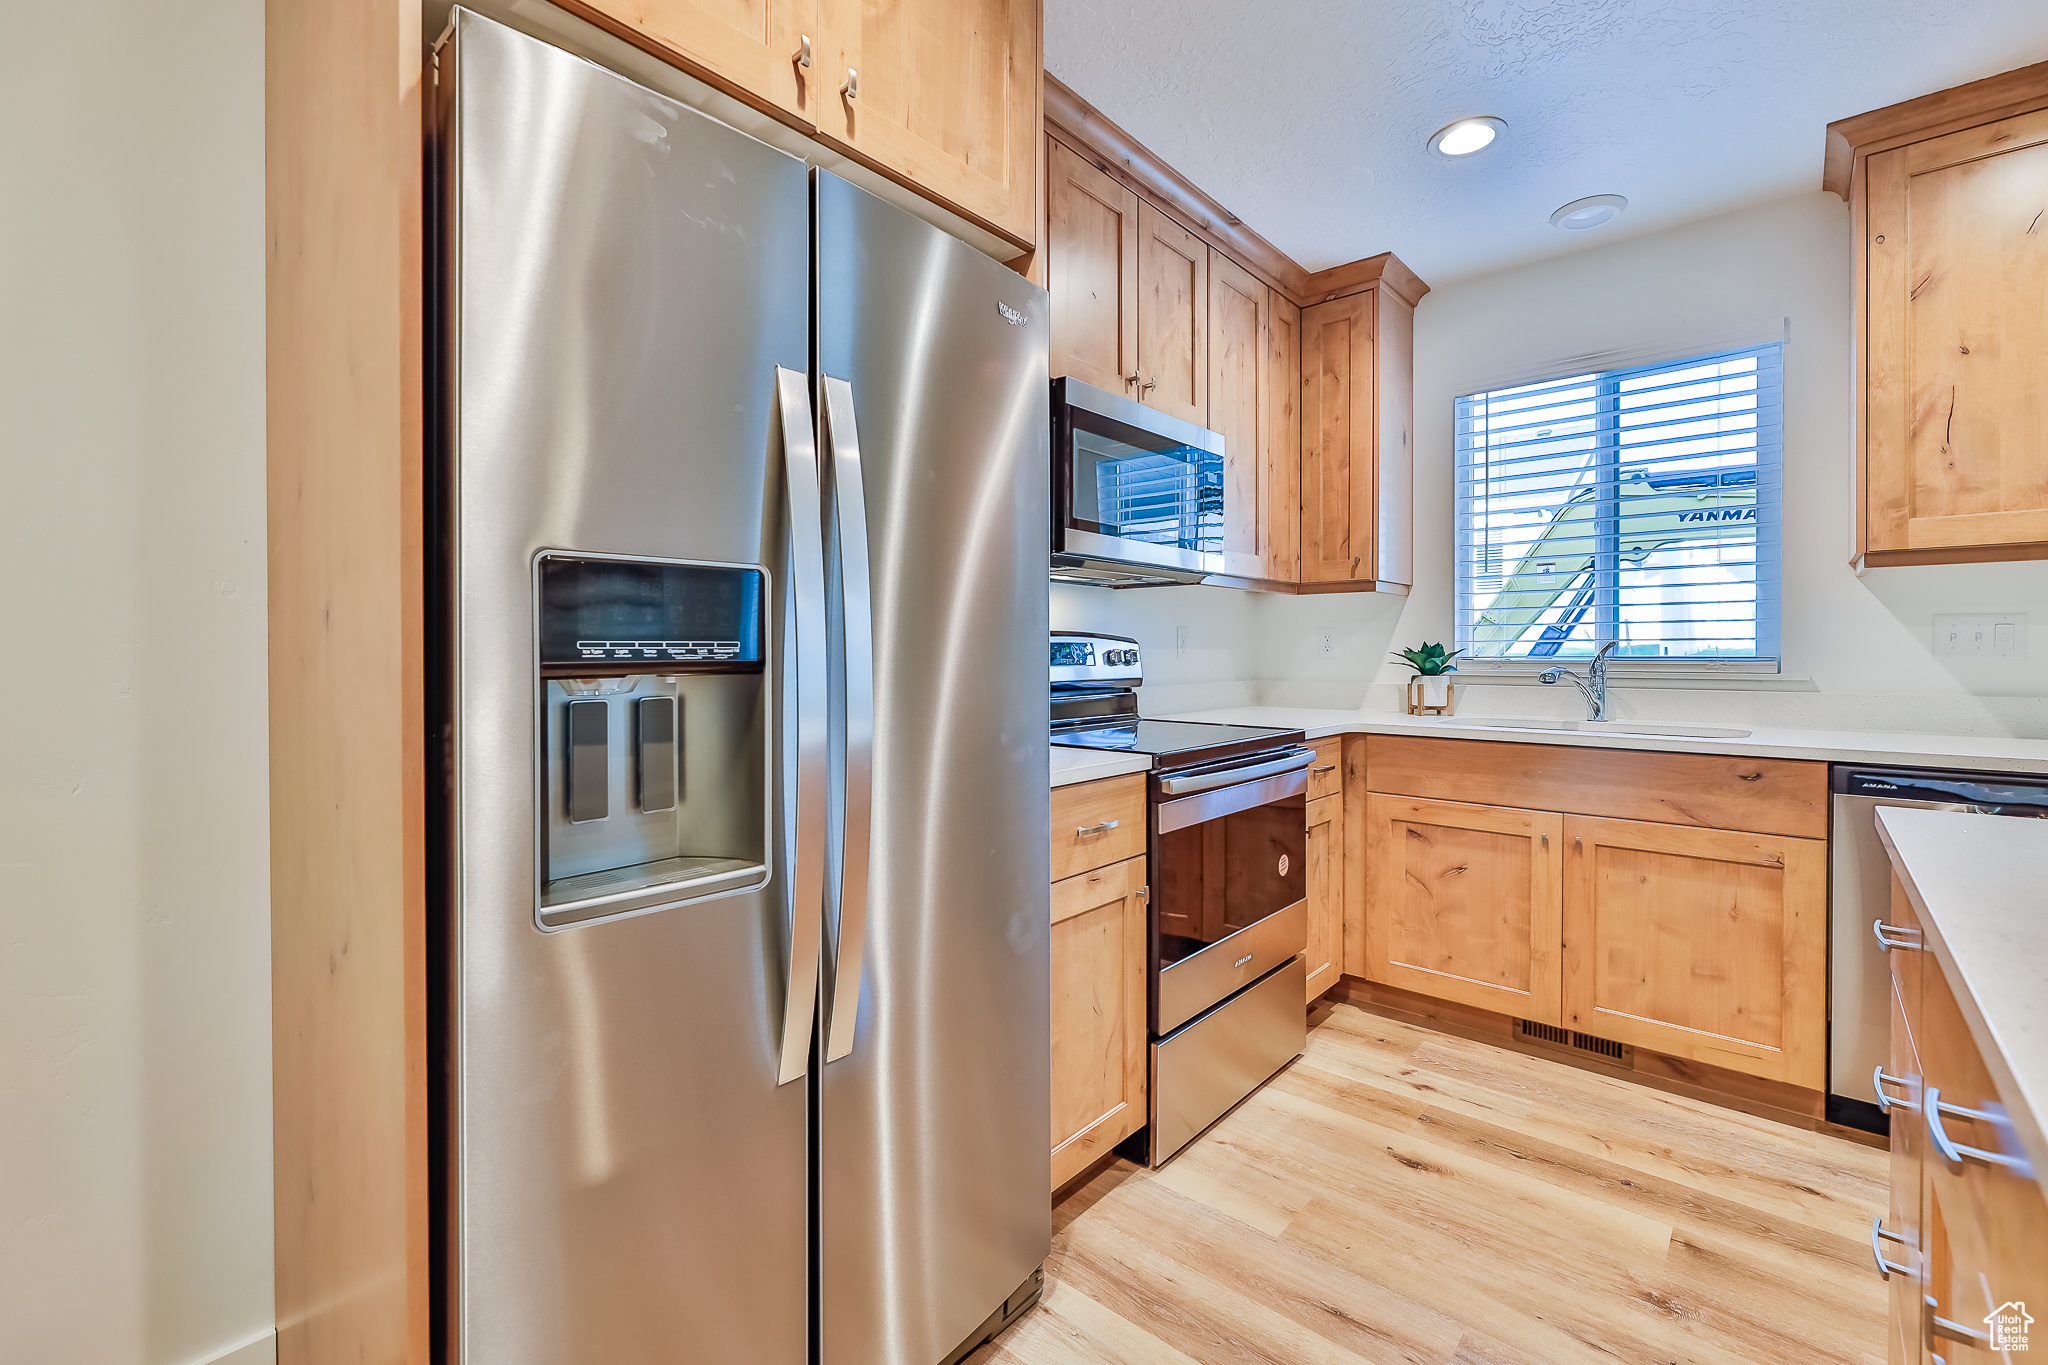 Kitchen with appliances with stainless steel finishes, light hardwood / wood-style floors, and sink